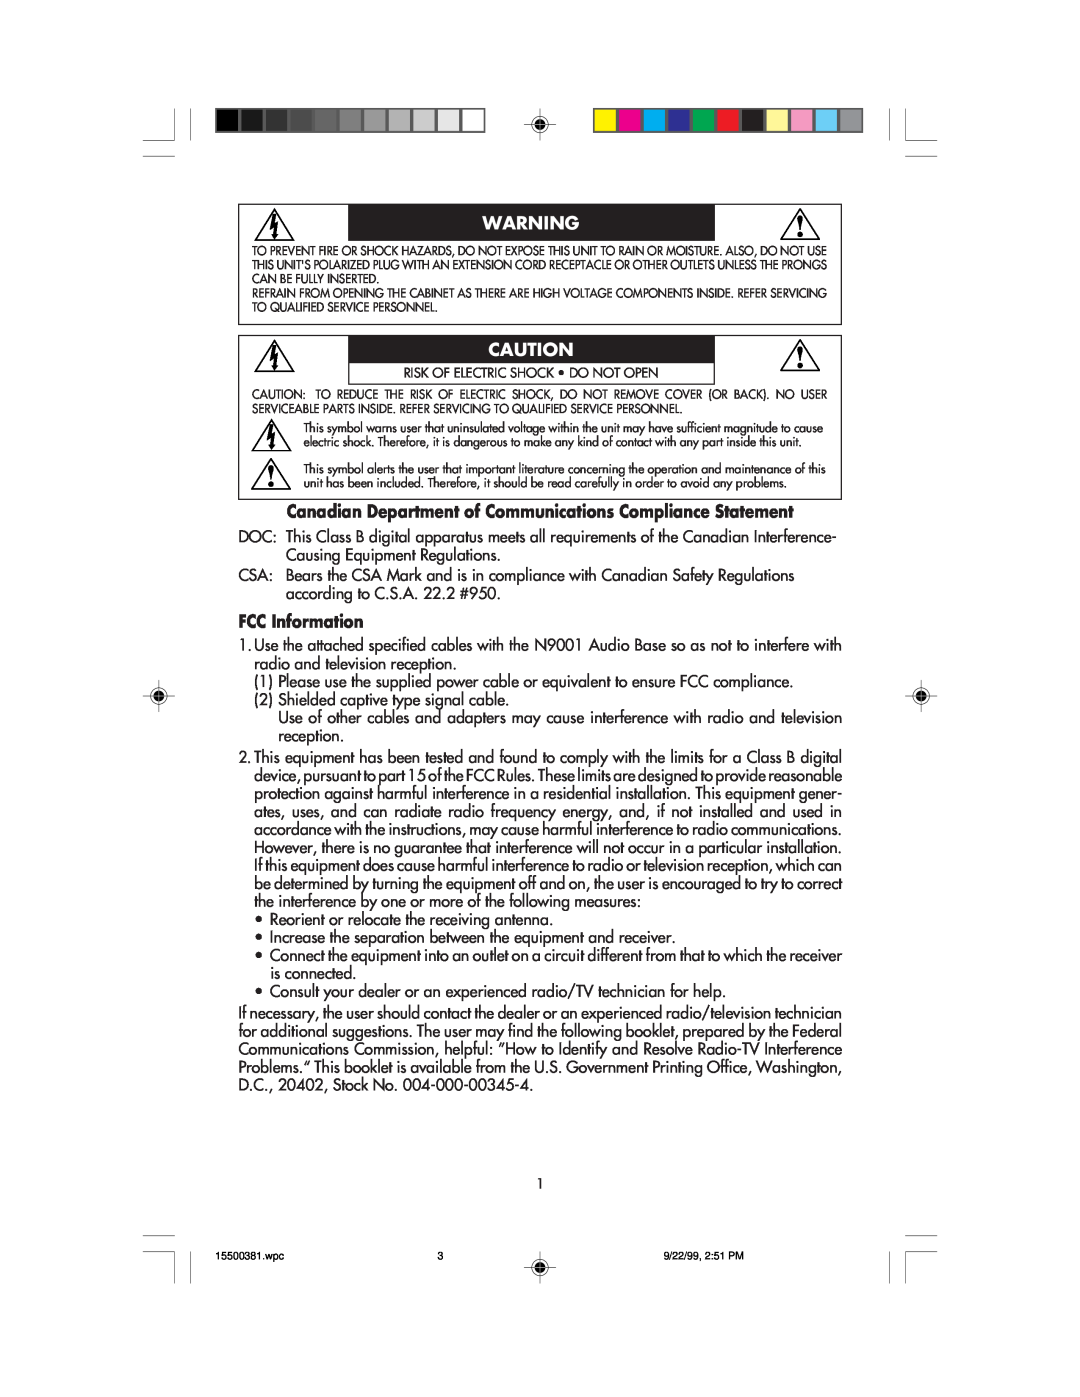 NEC FE700M manual Canadian Department of Communications Compliance Statement, FCC Information 